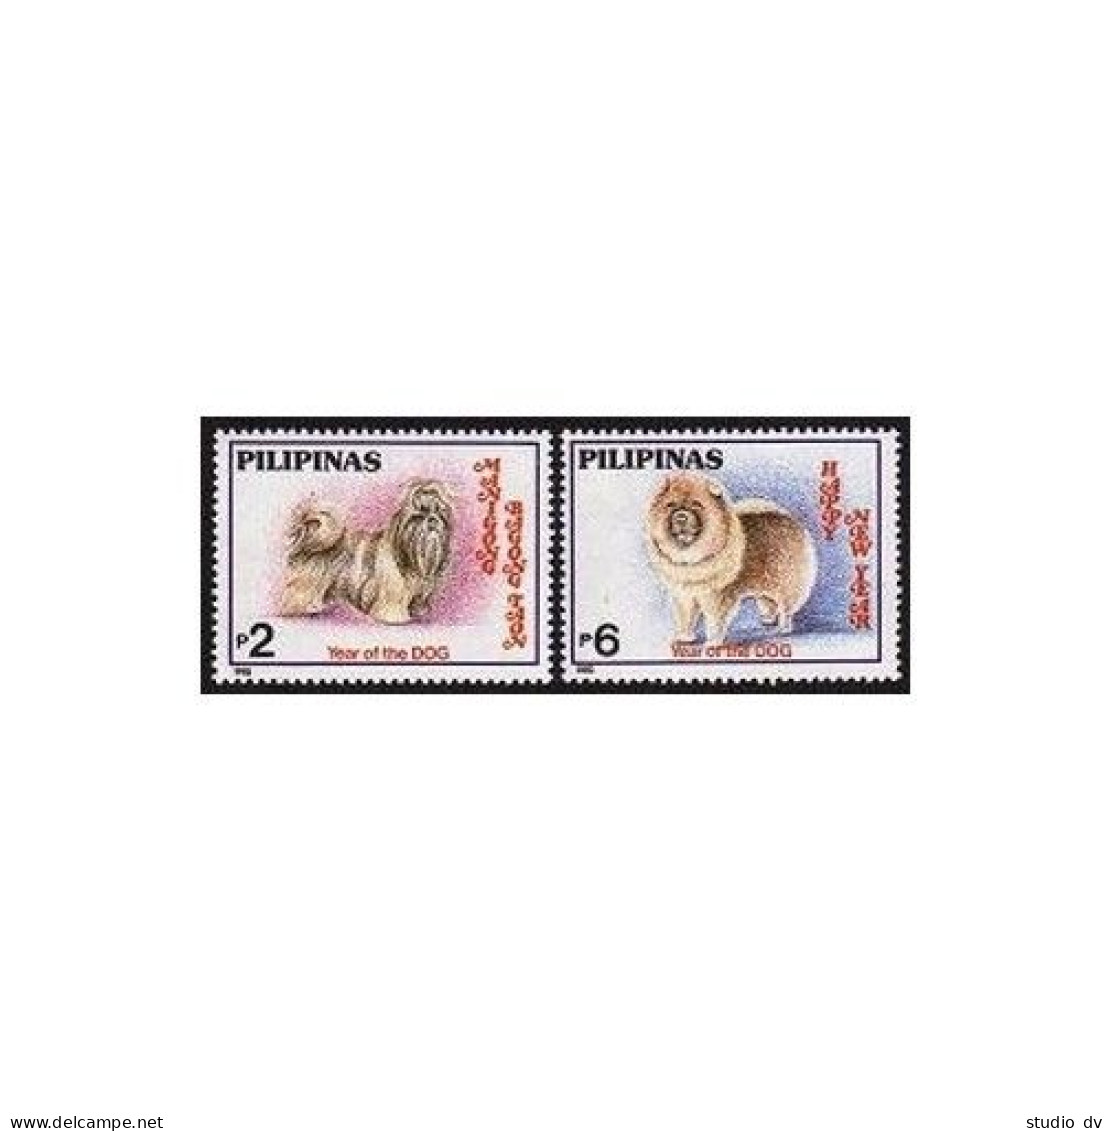 Philippines 2284-2285,2285a A,B,MNH. New Year 1994,Lunar Year Of The Dog. - Philippines